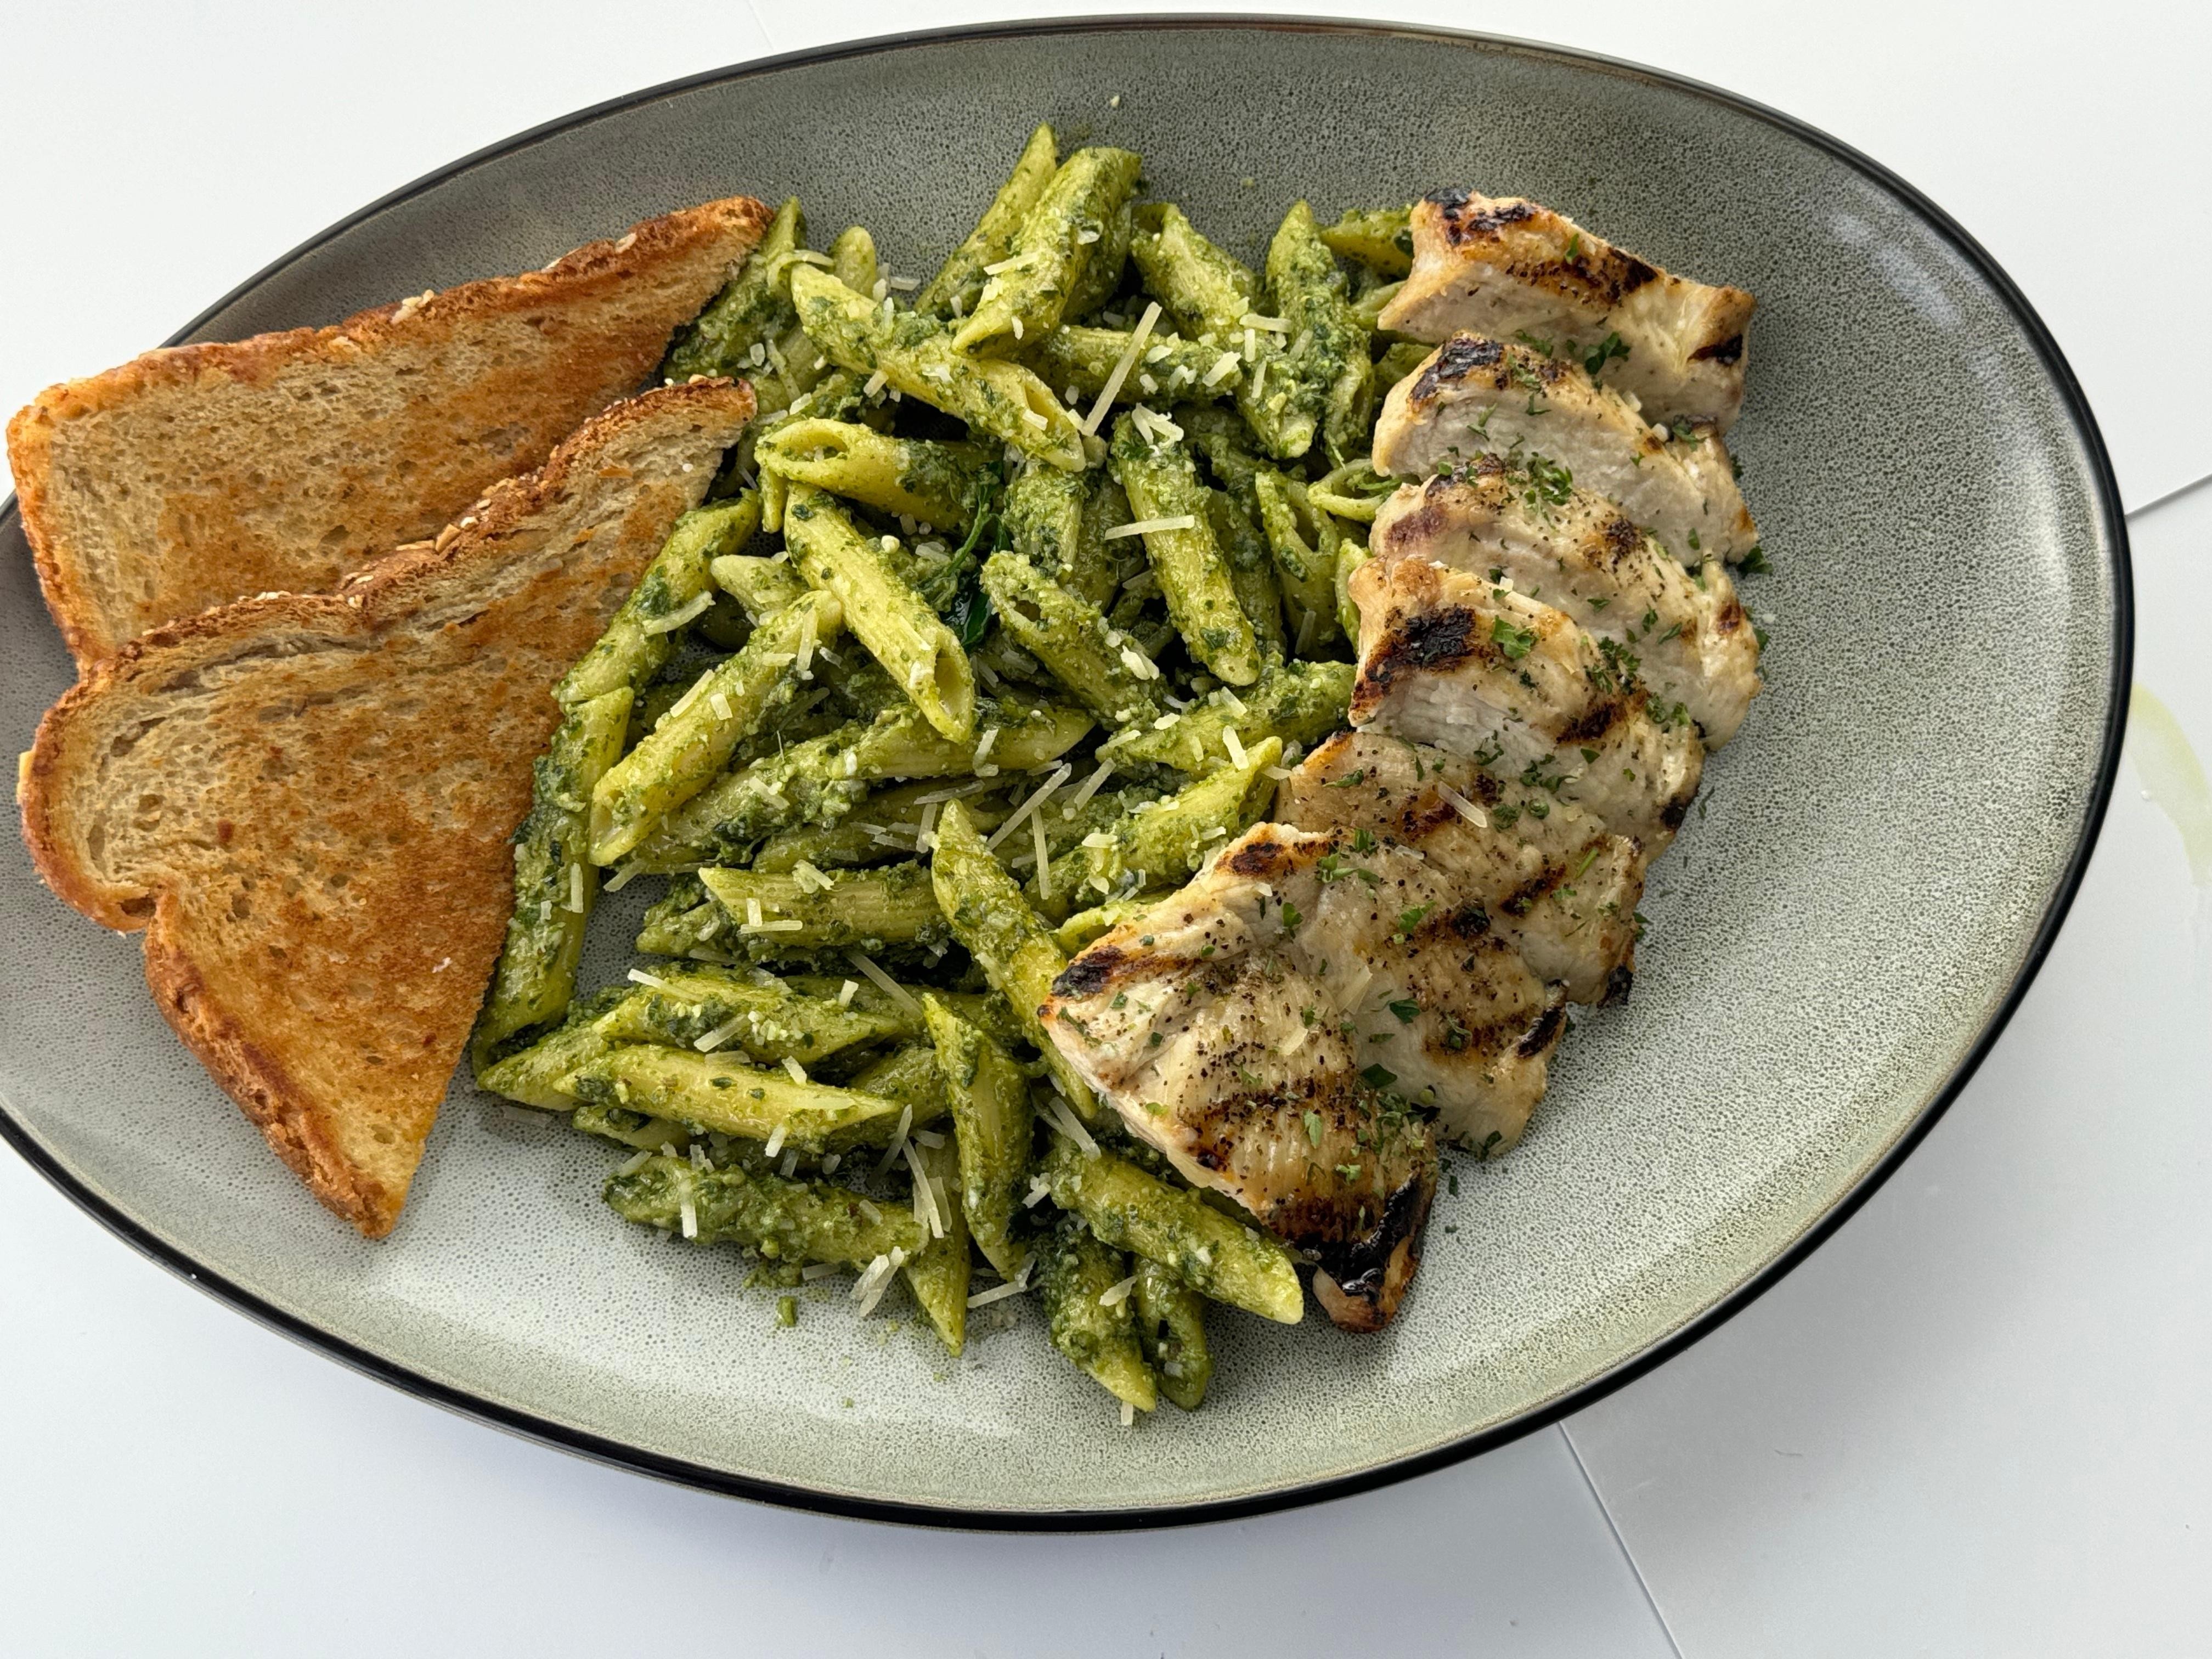 PENNE RIGATE WITH GREEN PESTO